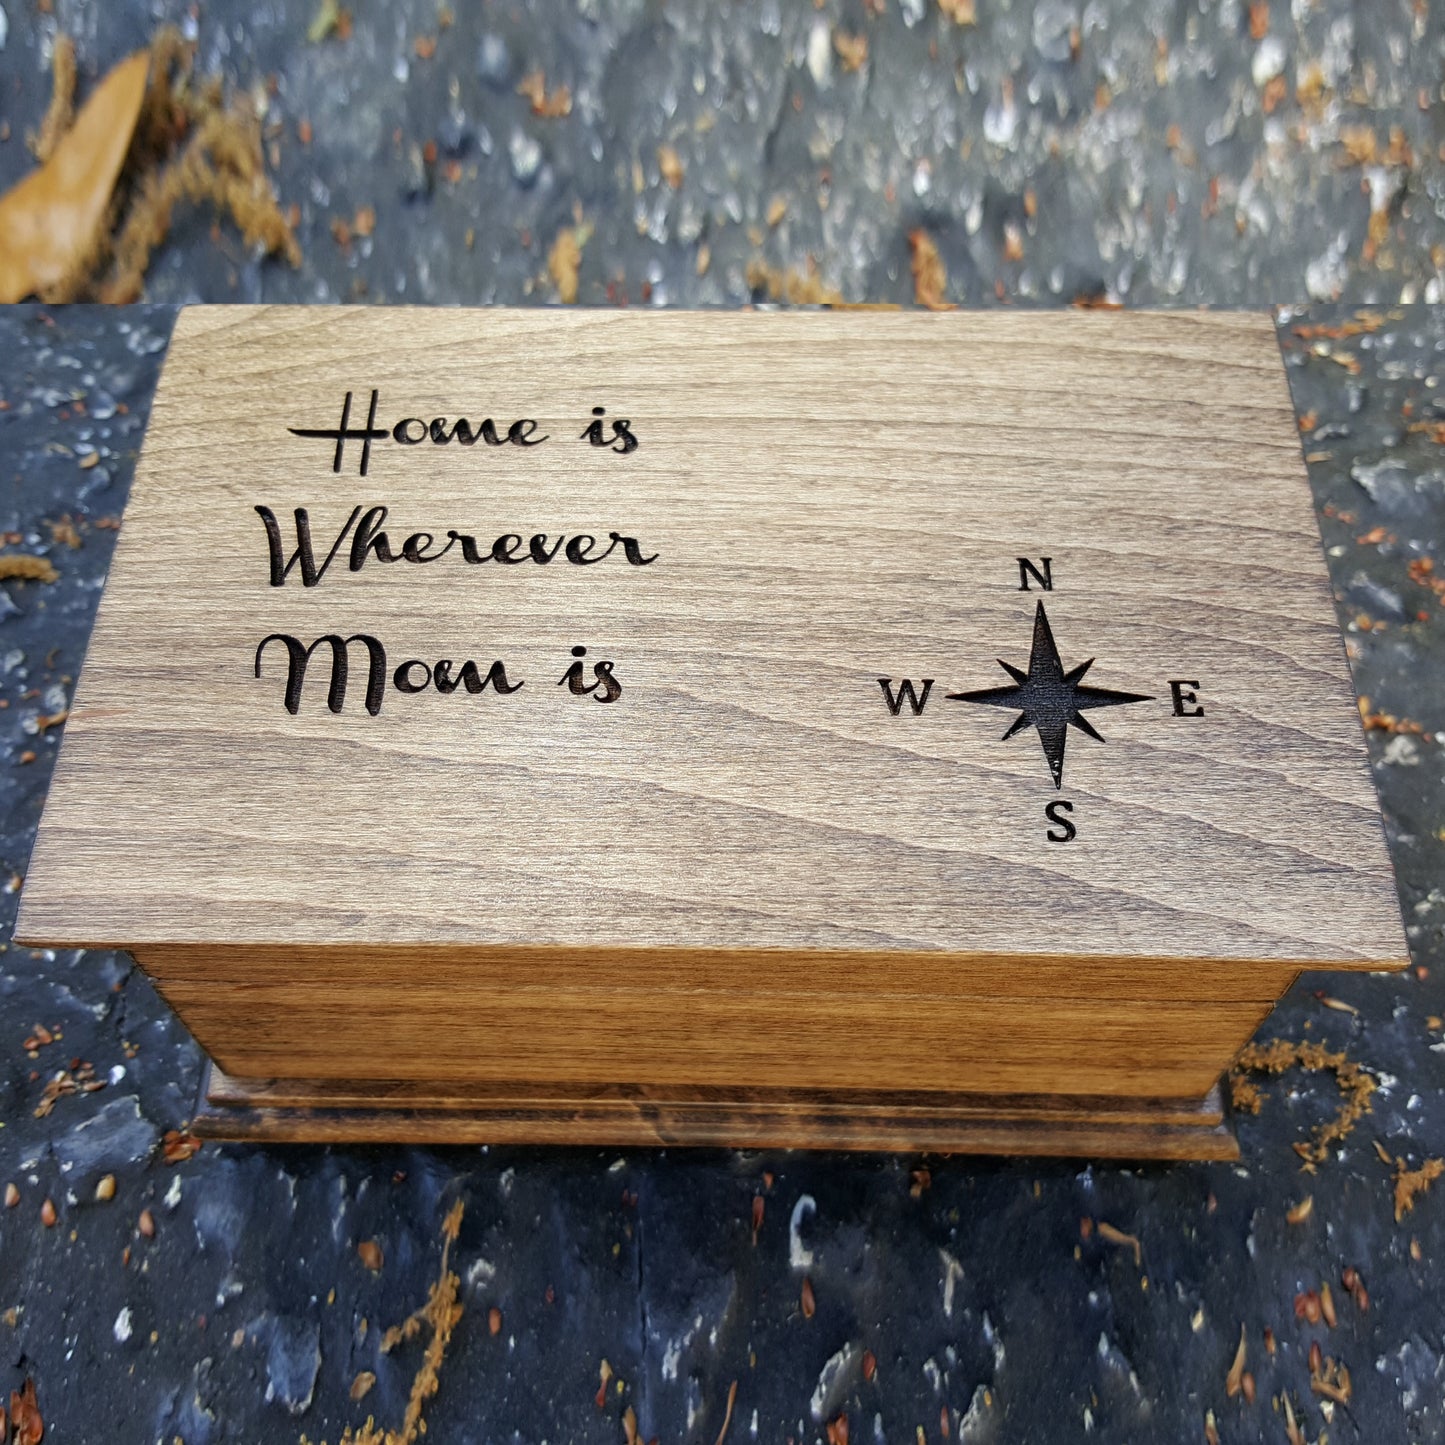 Home is wherever Mom is jewelry box